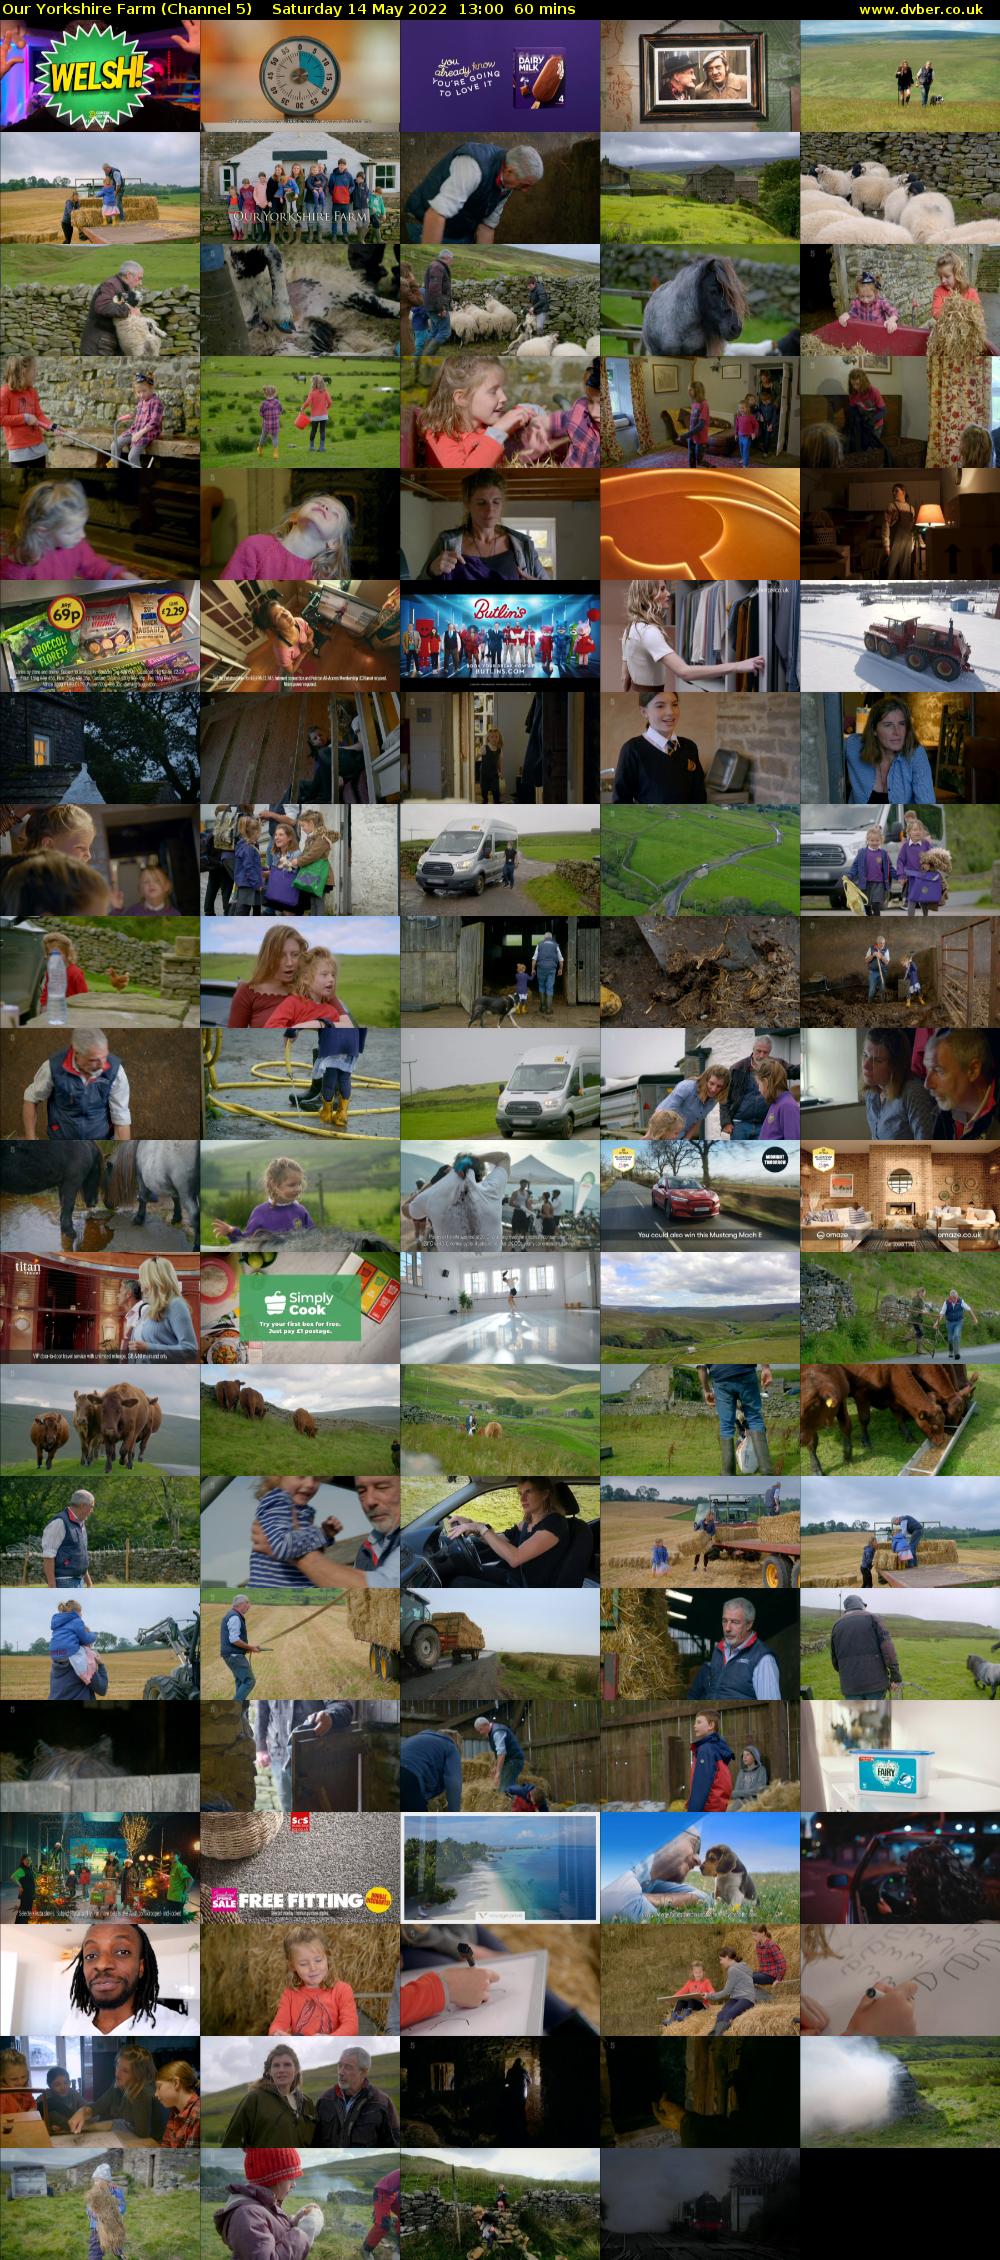 Our Yorkshire Farm (Channel 5) Saturday 14 May 2022 13:00 - 14:00